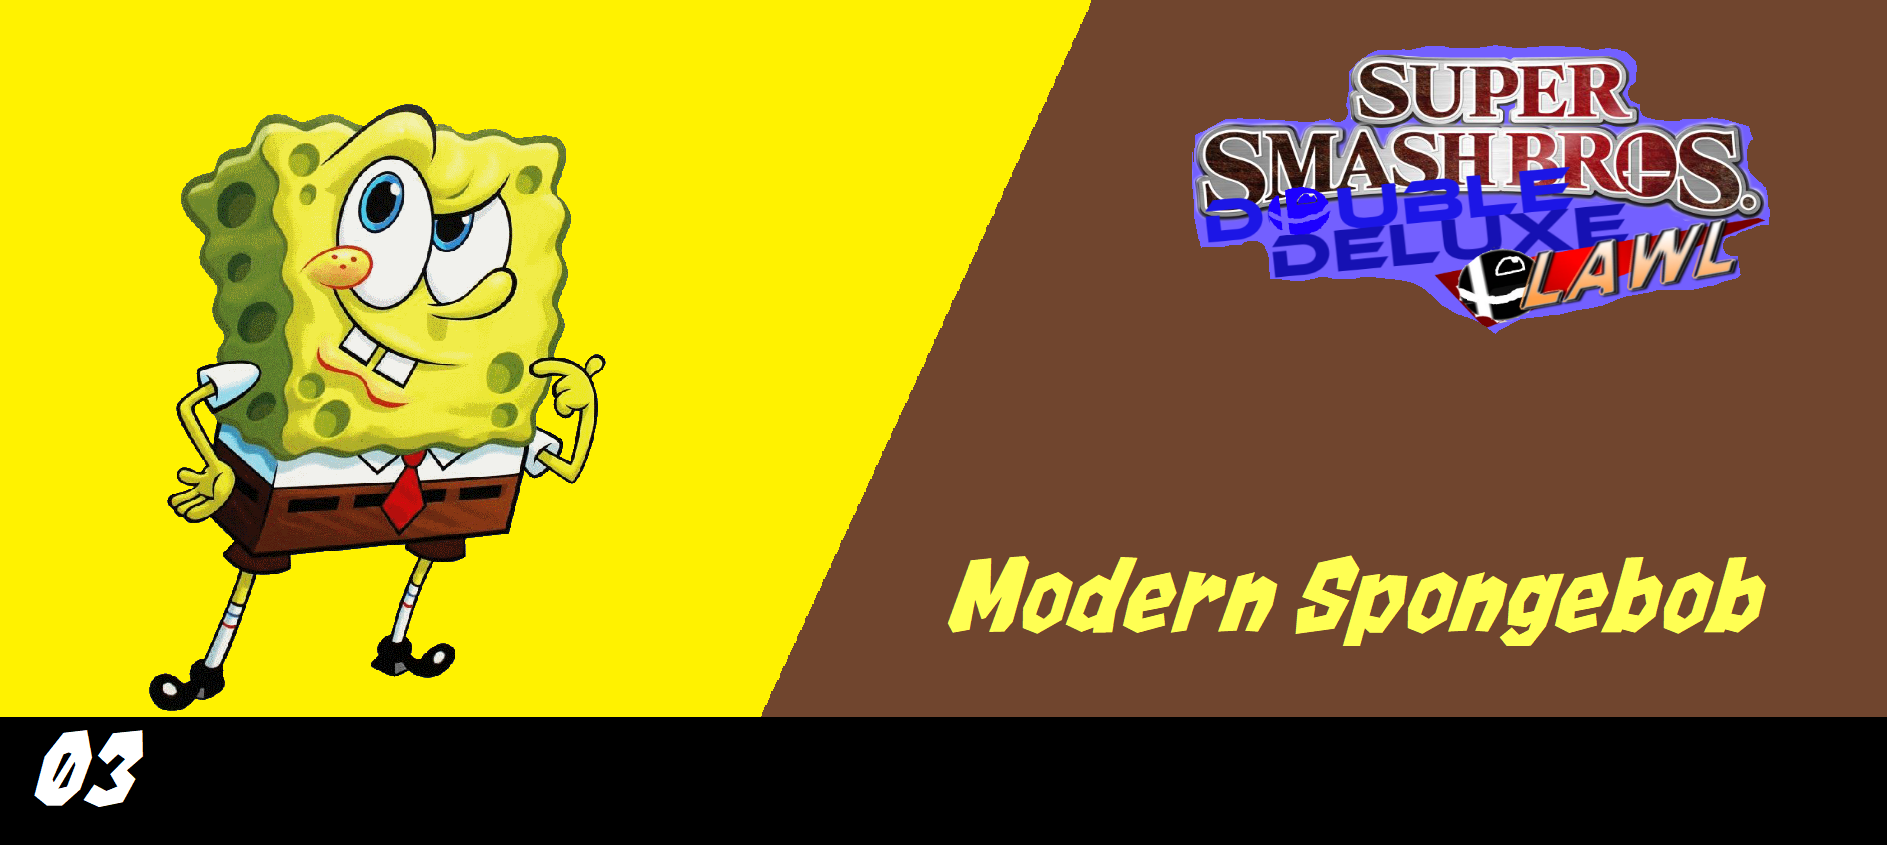 https://static.wikia.nocookie.net/super-smash-bros-lawl-double-deluxe/images/0/02/ModernSpongebob.png/revision/latest?cb=20191009064923